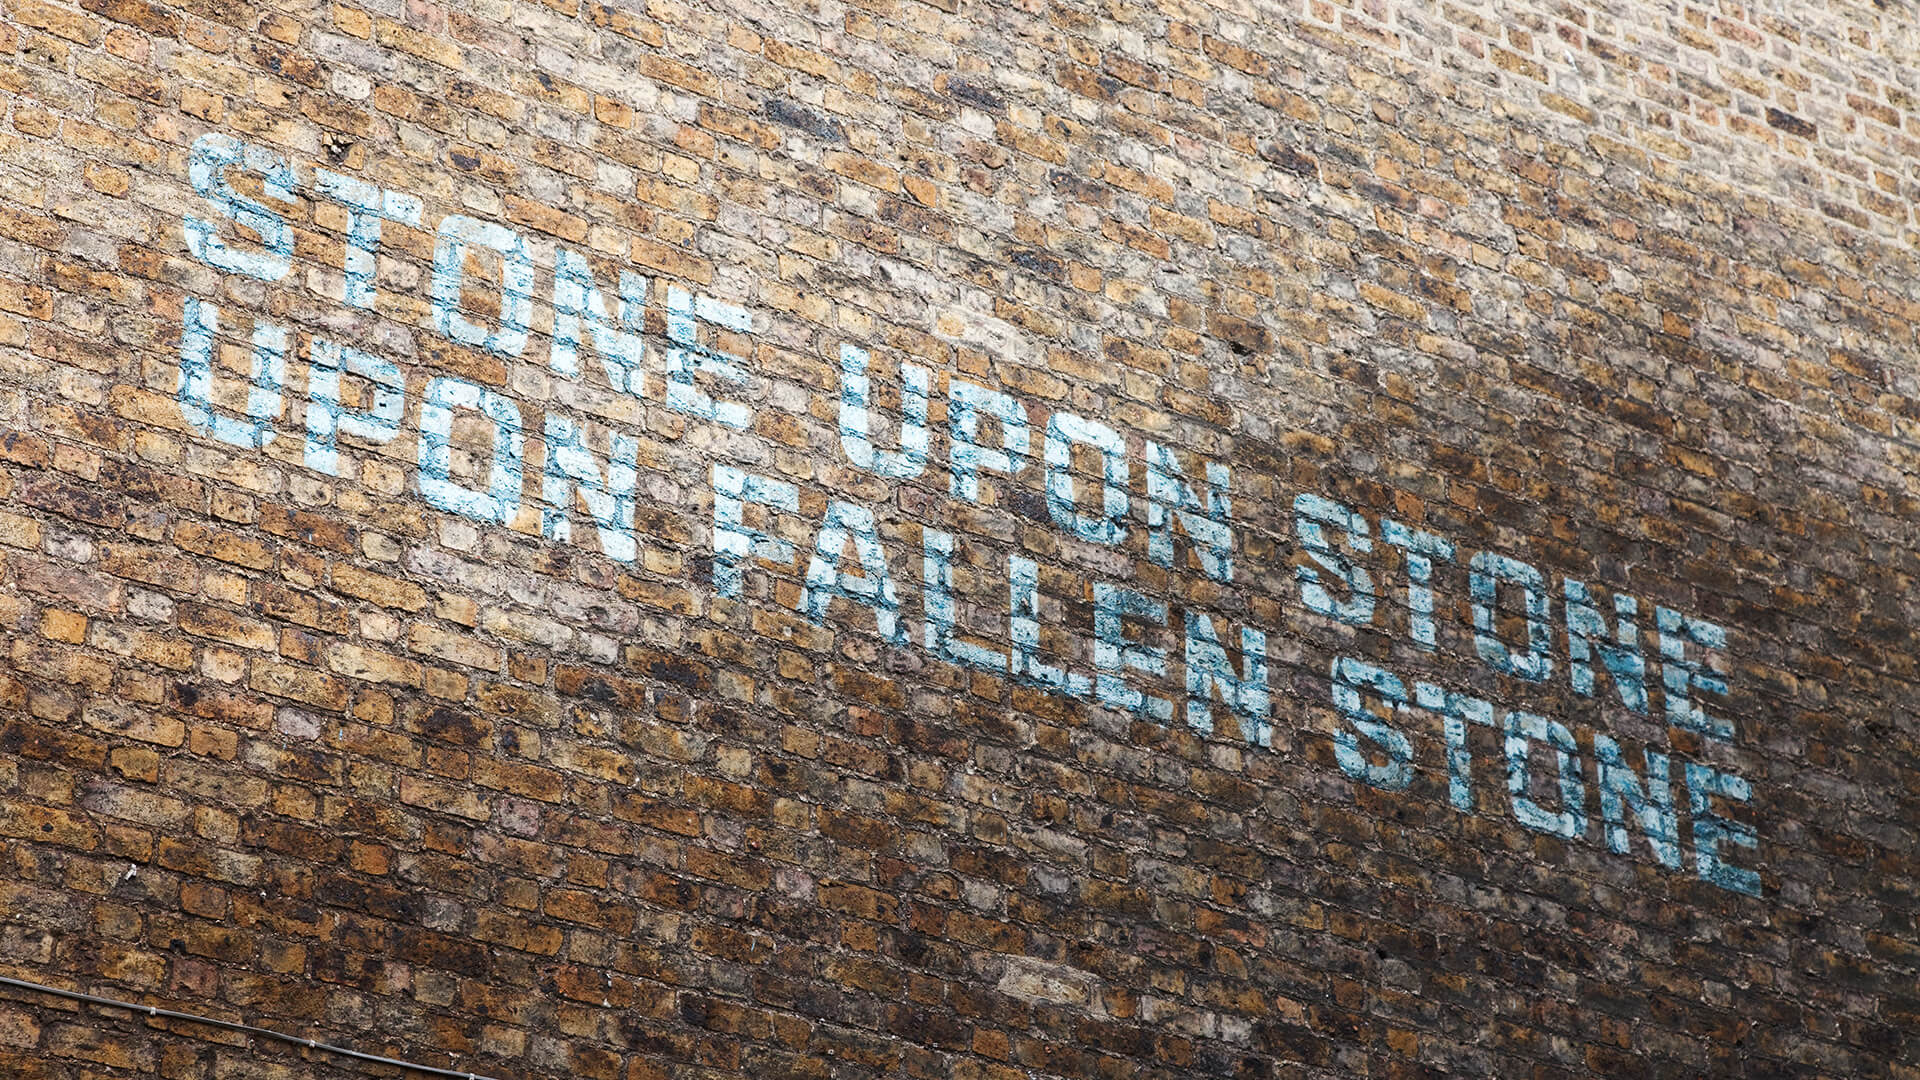 Uppercase text is painted in pale blue on the brick wall of the Guinness Vathouse. The text reads: "Stone Upon Stone Upon Fallen Stone"